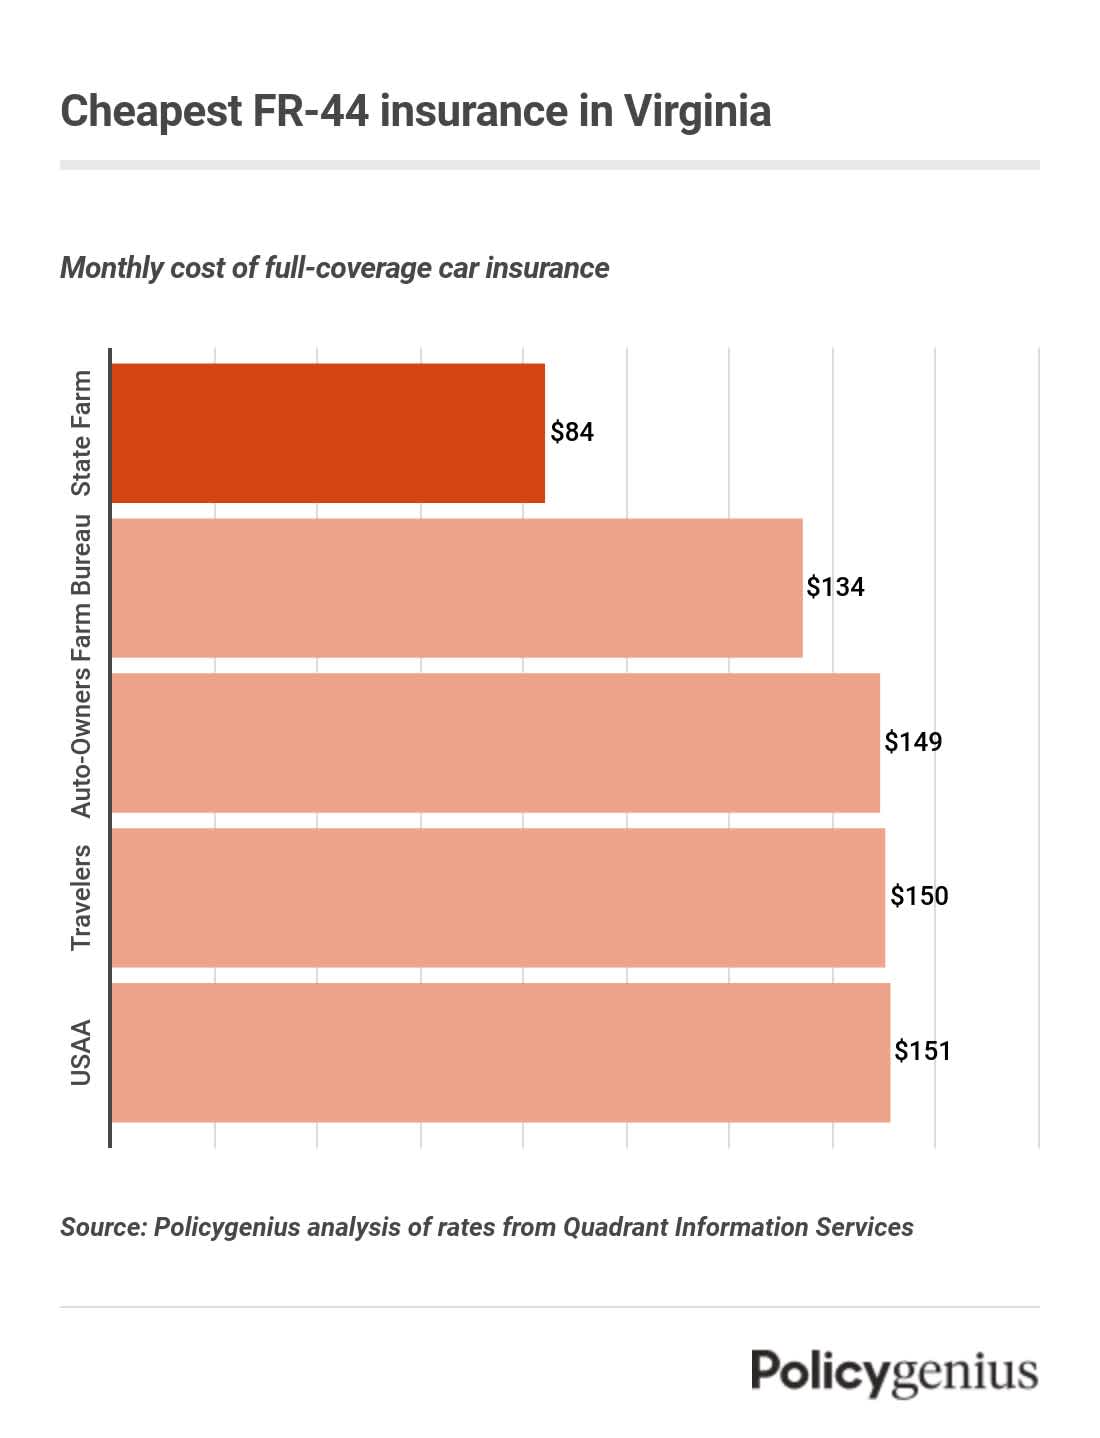 A bar graph showing the companies with the cheapest FR-44 insurance in Virginia, with State Farm having the lowest rates.